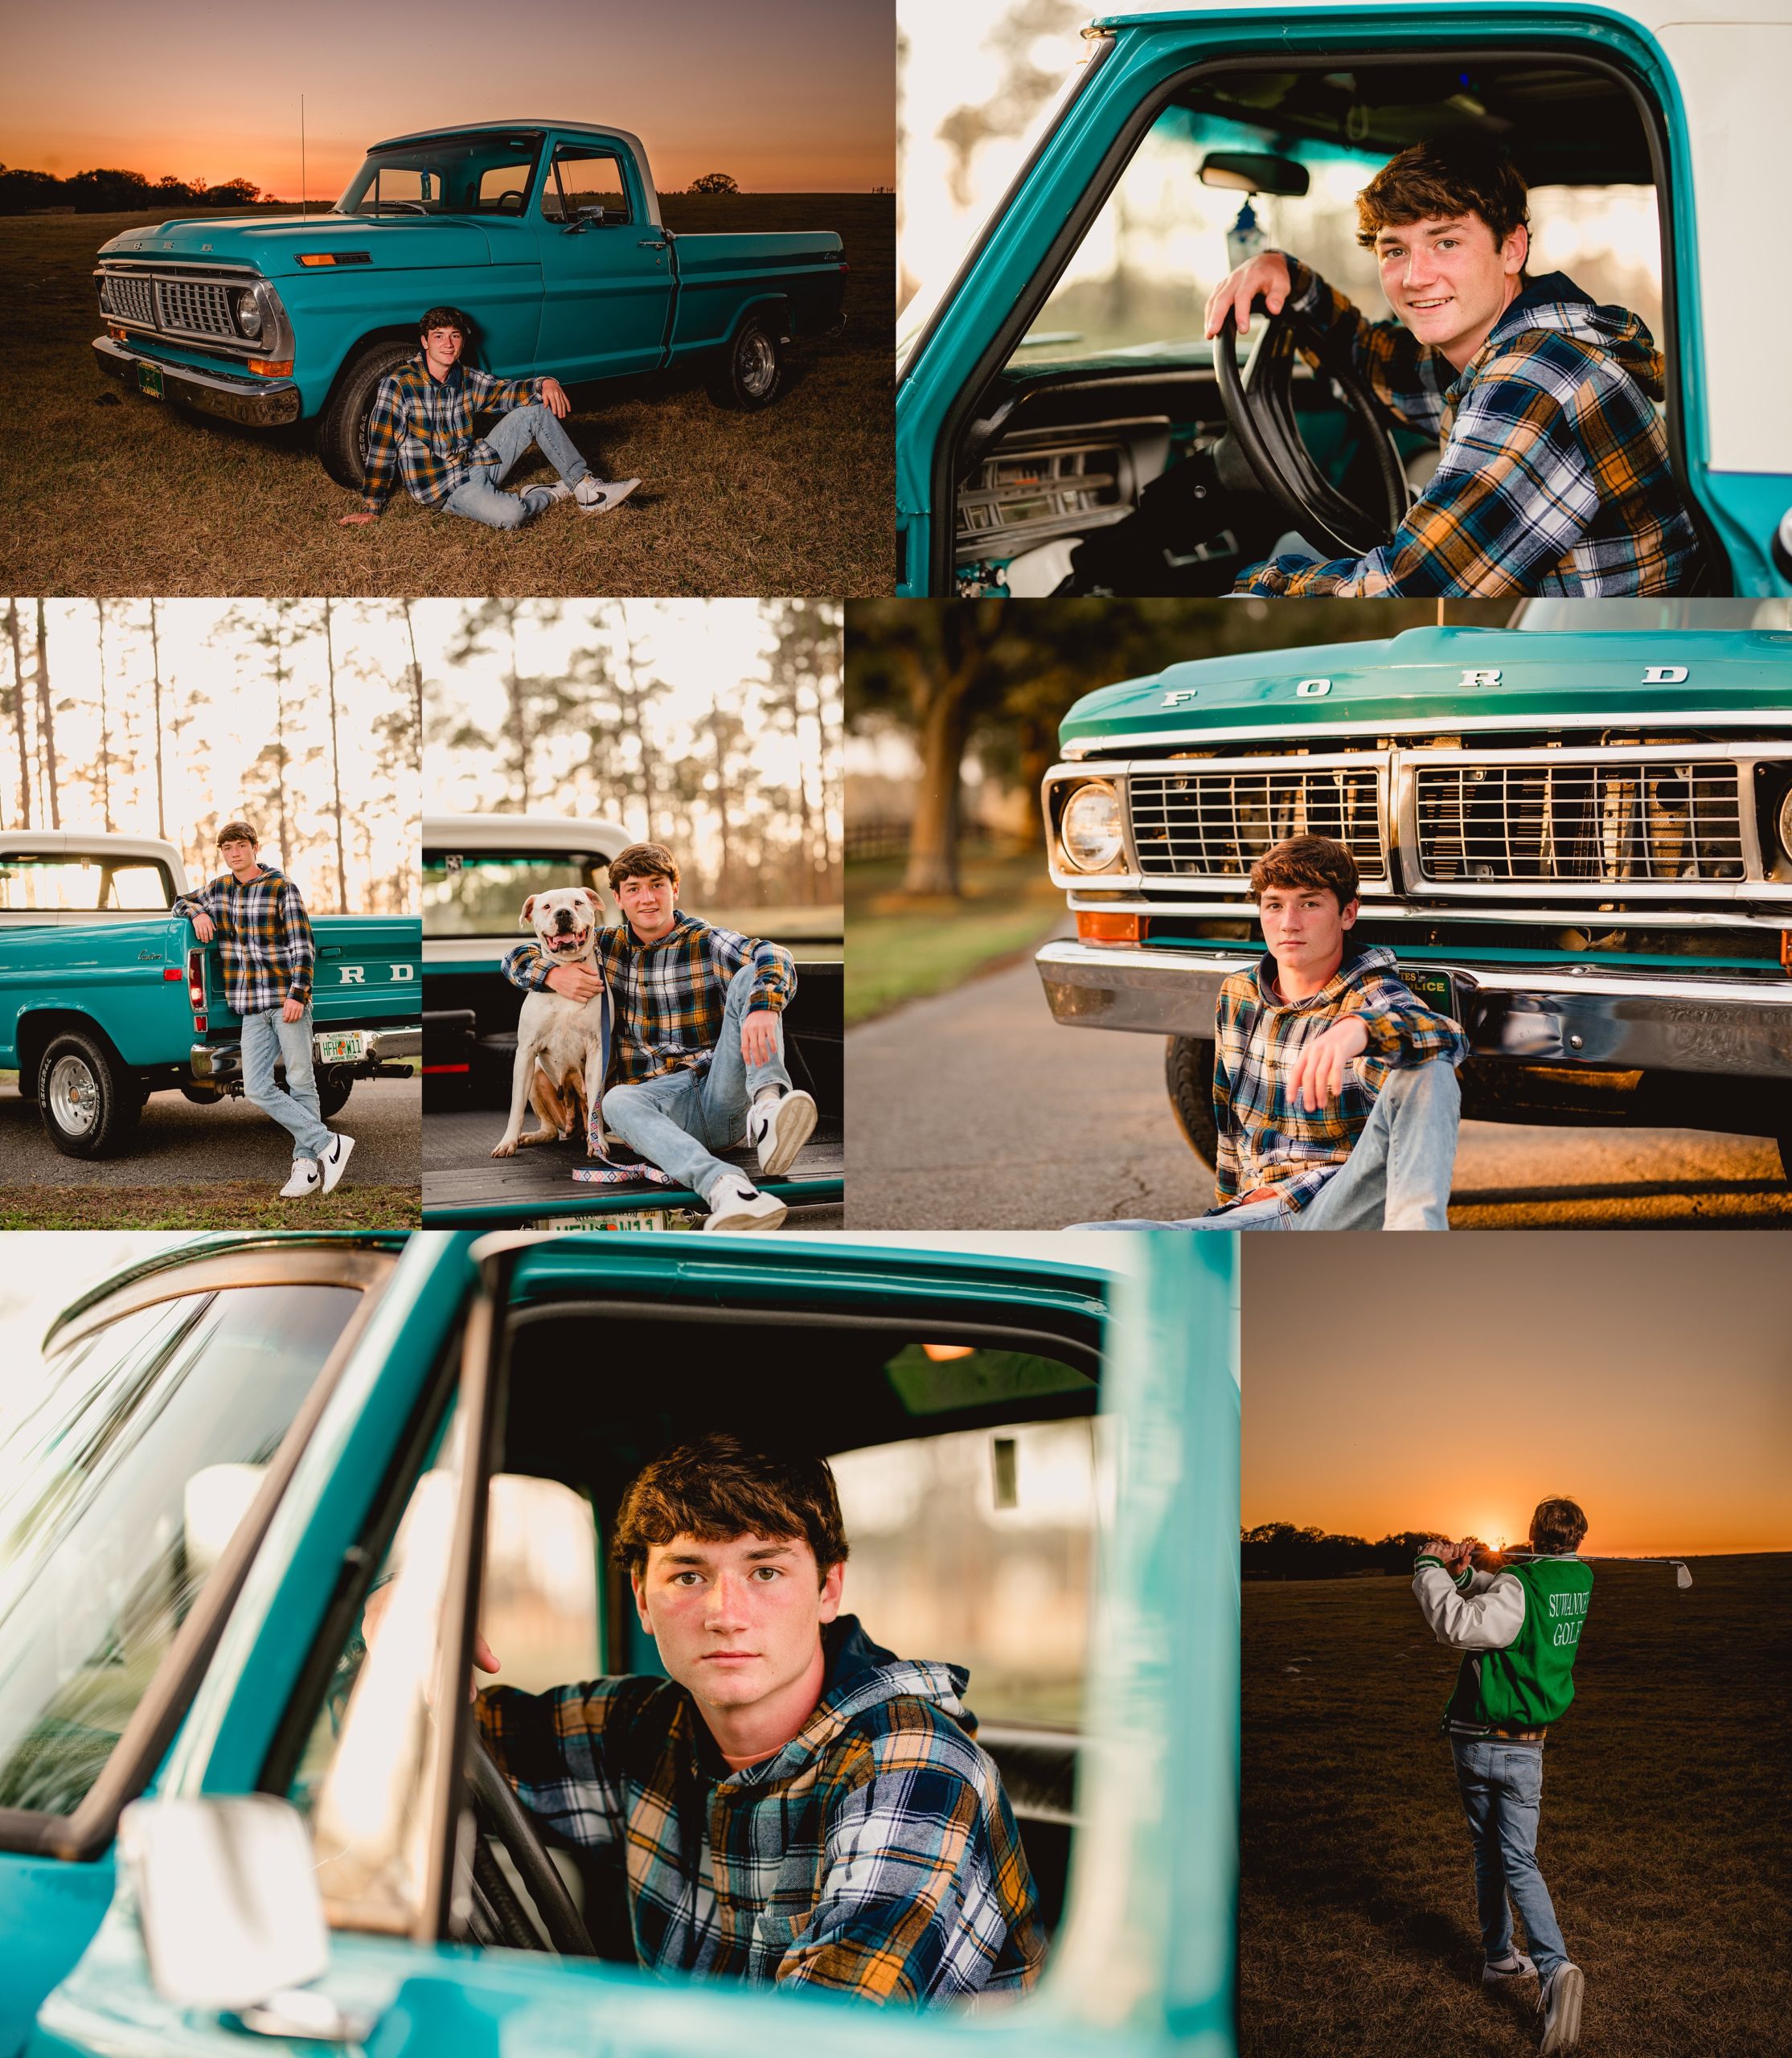 Vintage truck with senior guy at sunset for professional photoshoot.